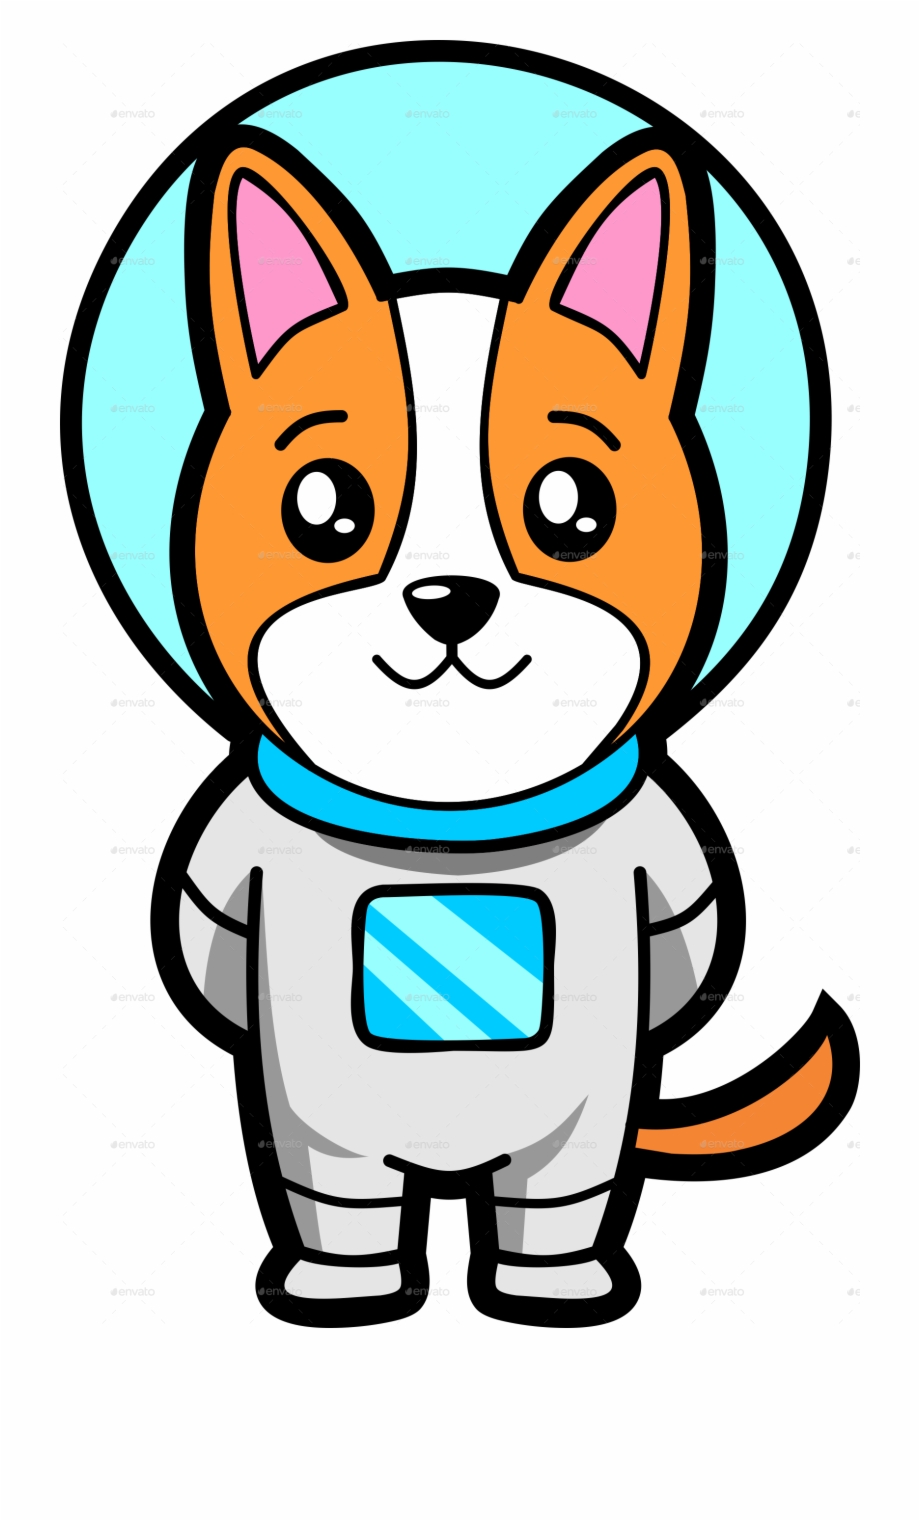 Jpg And Png Files 1 Cartoon Space Dog